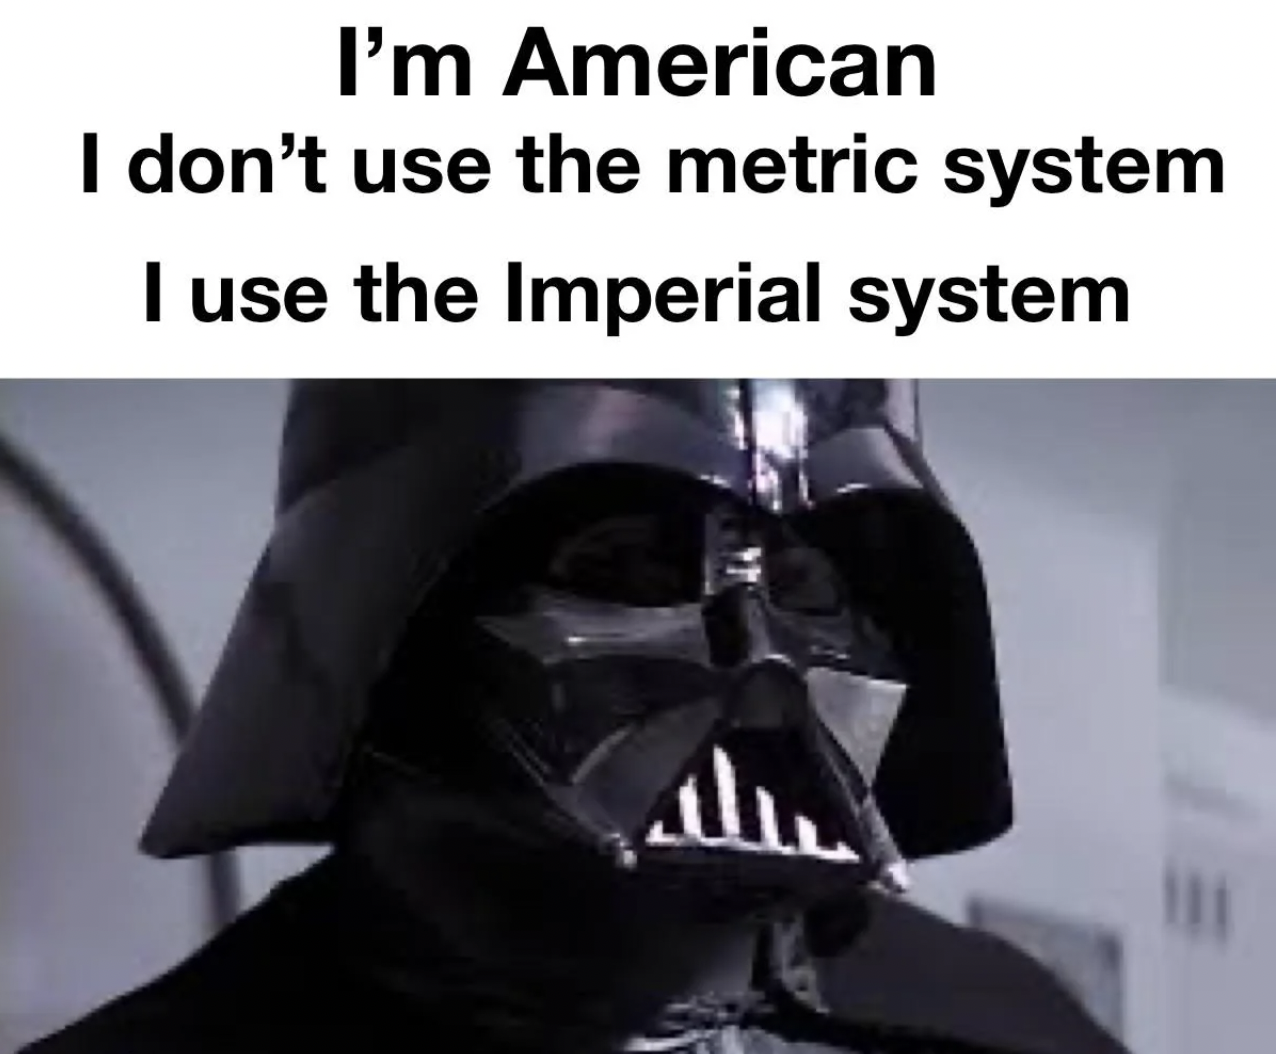 darth vader - I'm American I don't use the metric system I use the Imperial system